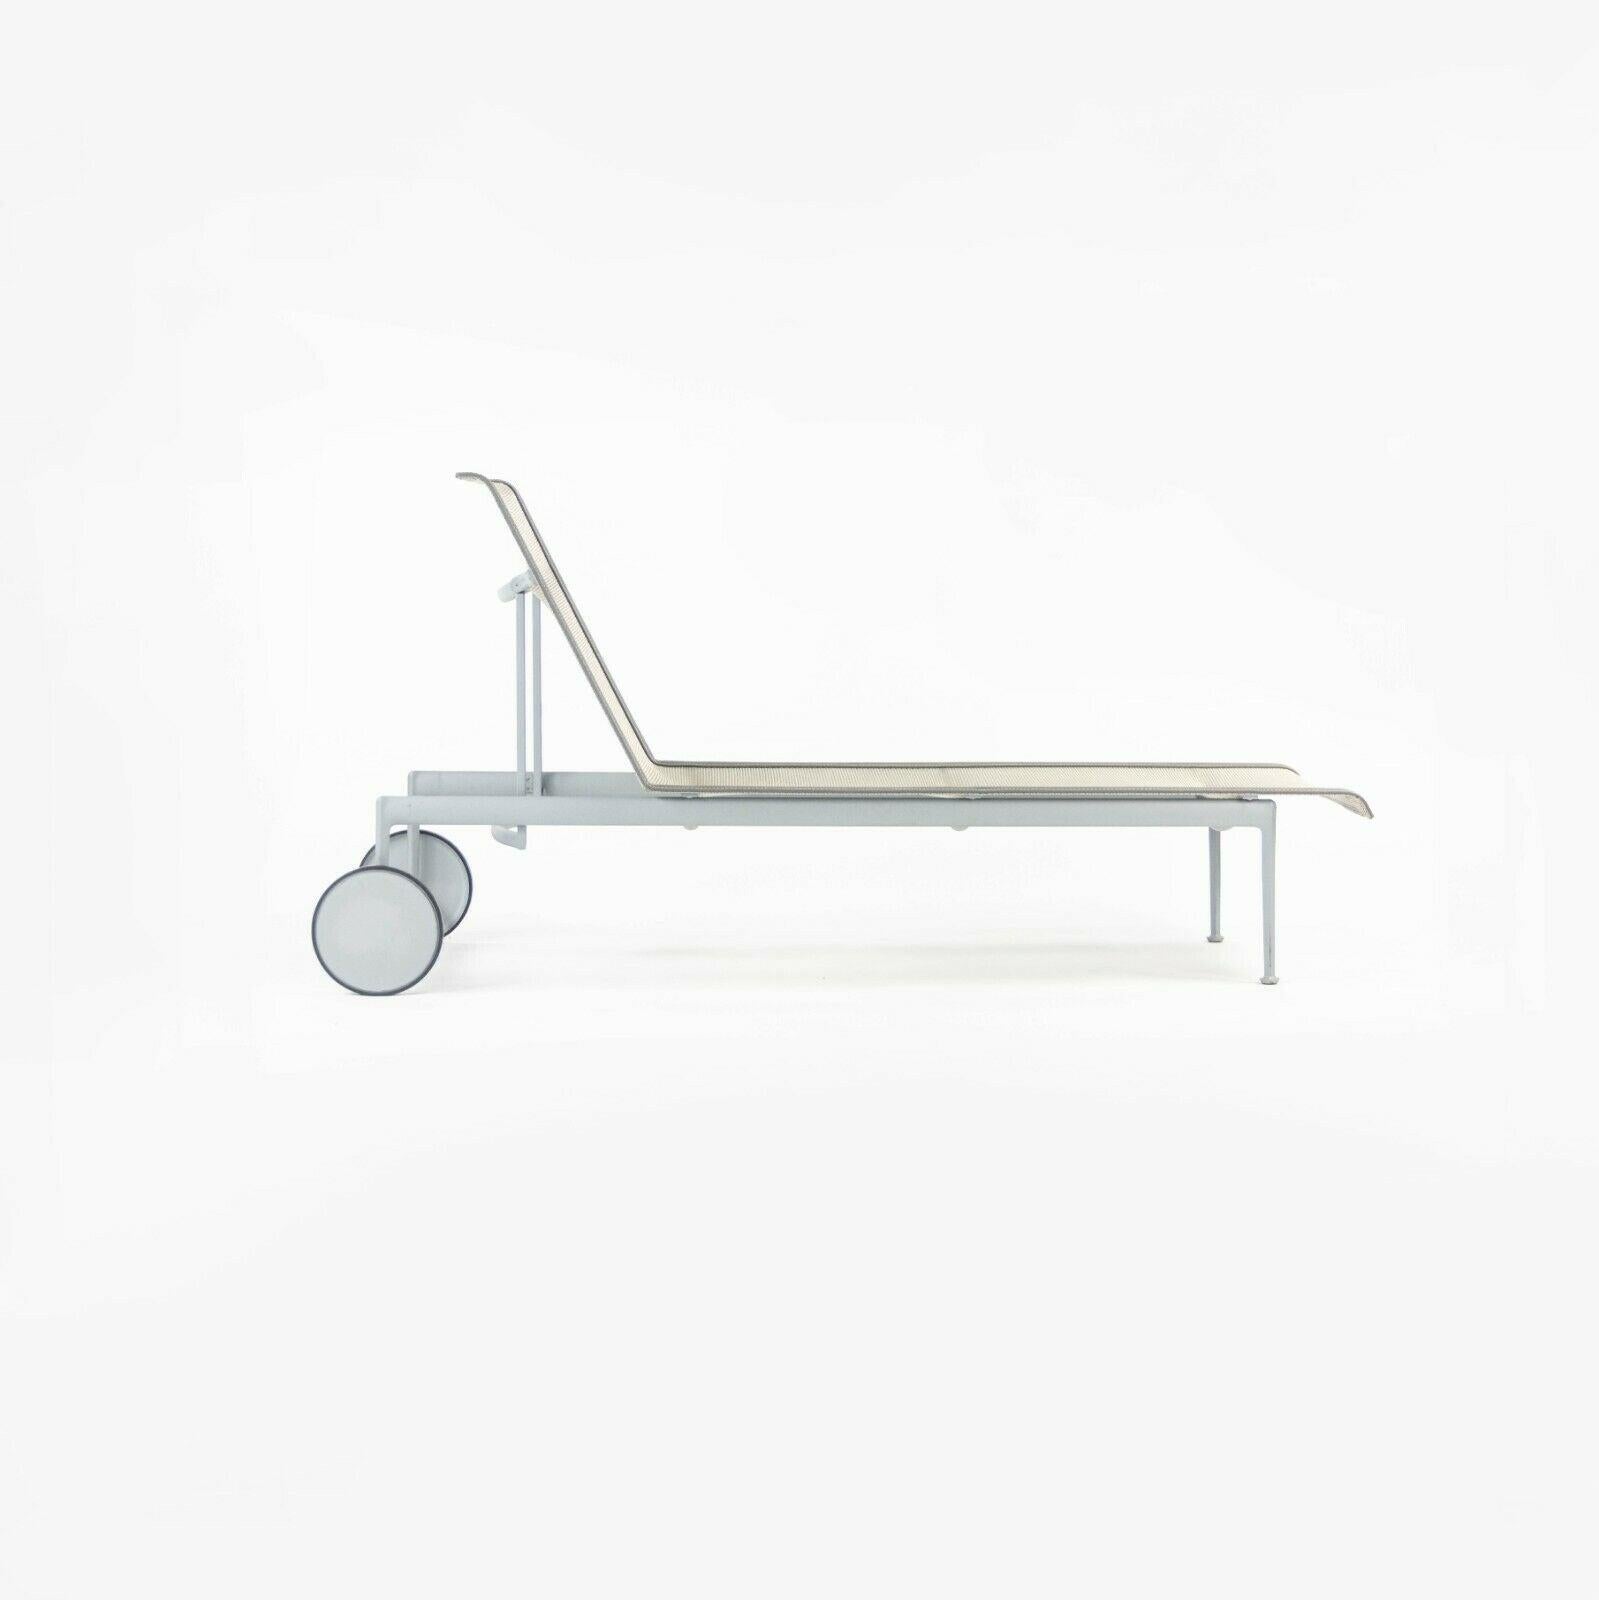 Contemporary 2012 Richard Schultz 1966 Series Adjustable Chaise Lounge Chair in Silver For Sale